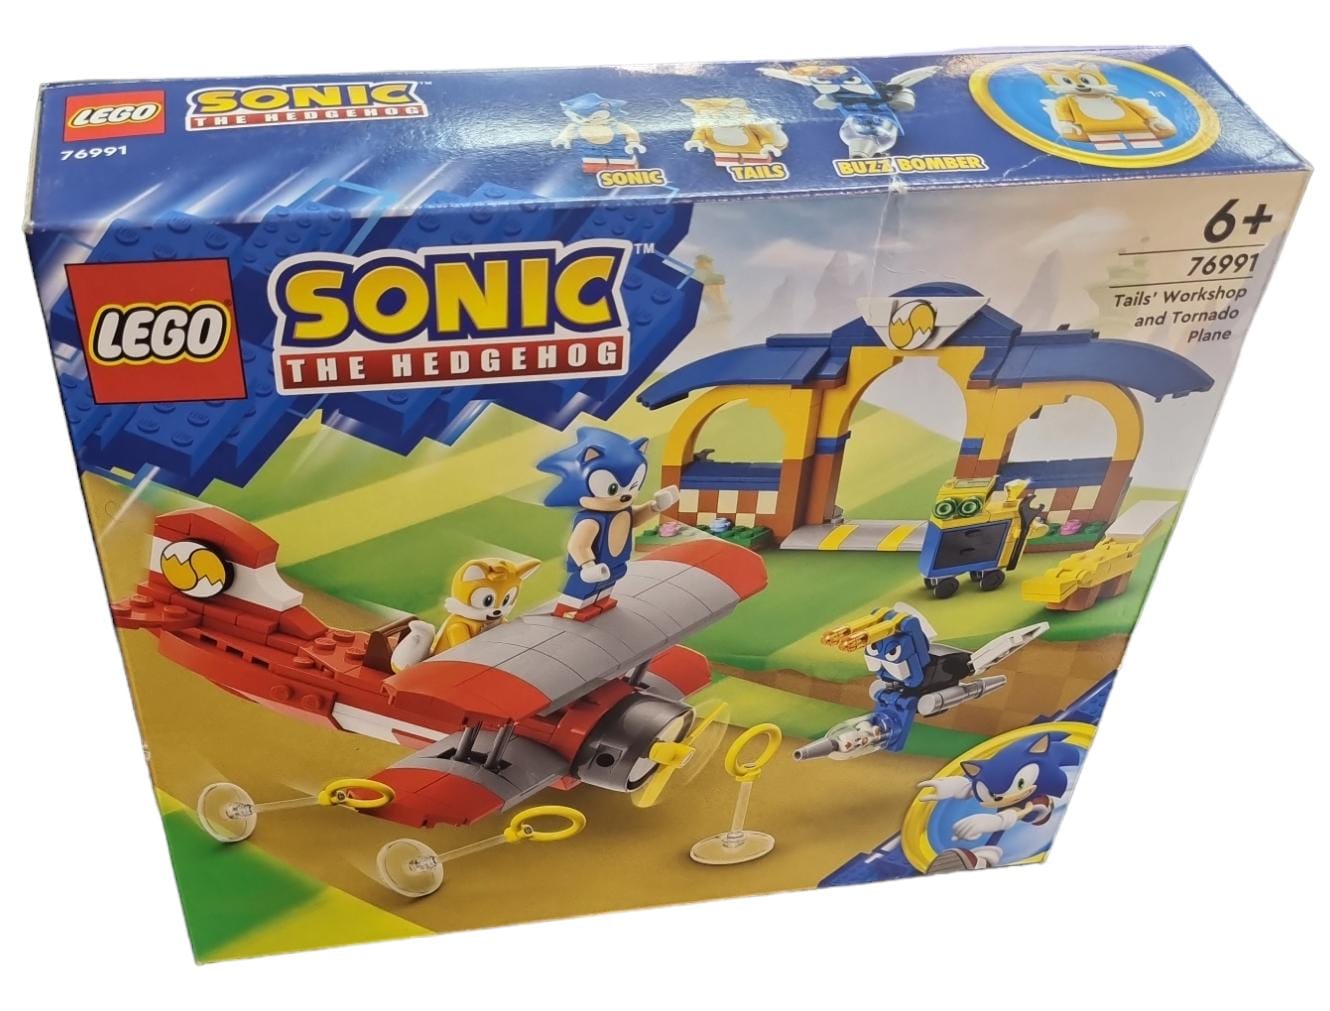 Lego Sonic The Hedgehog - 76991 - Tail's Workshop and Tornado Plane - SEALED